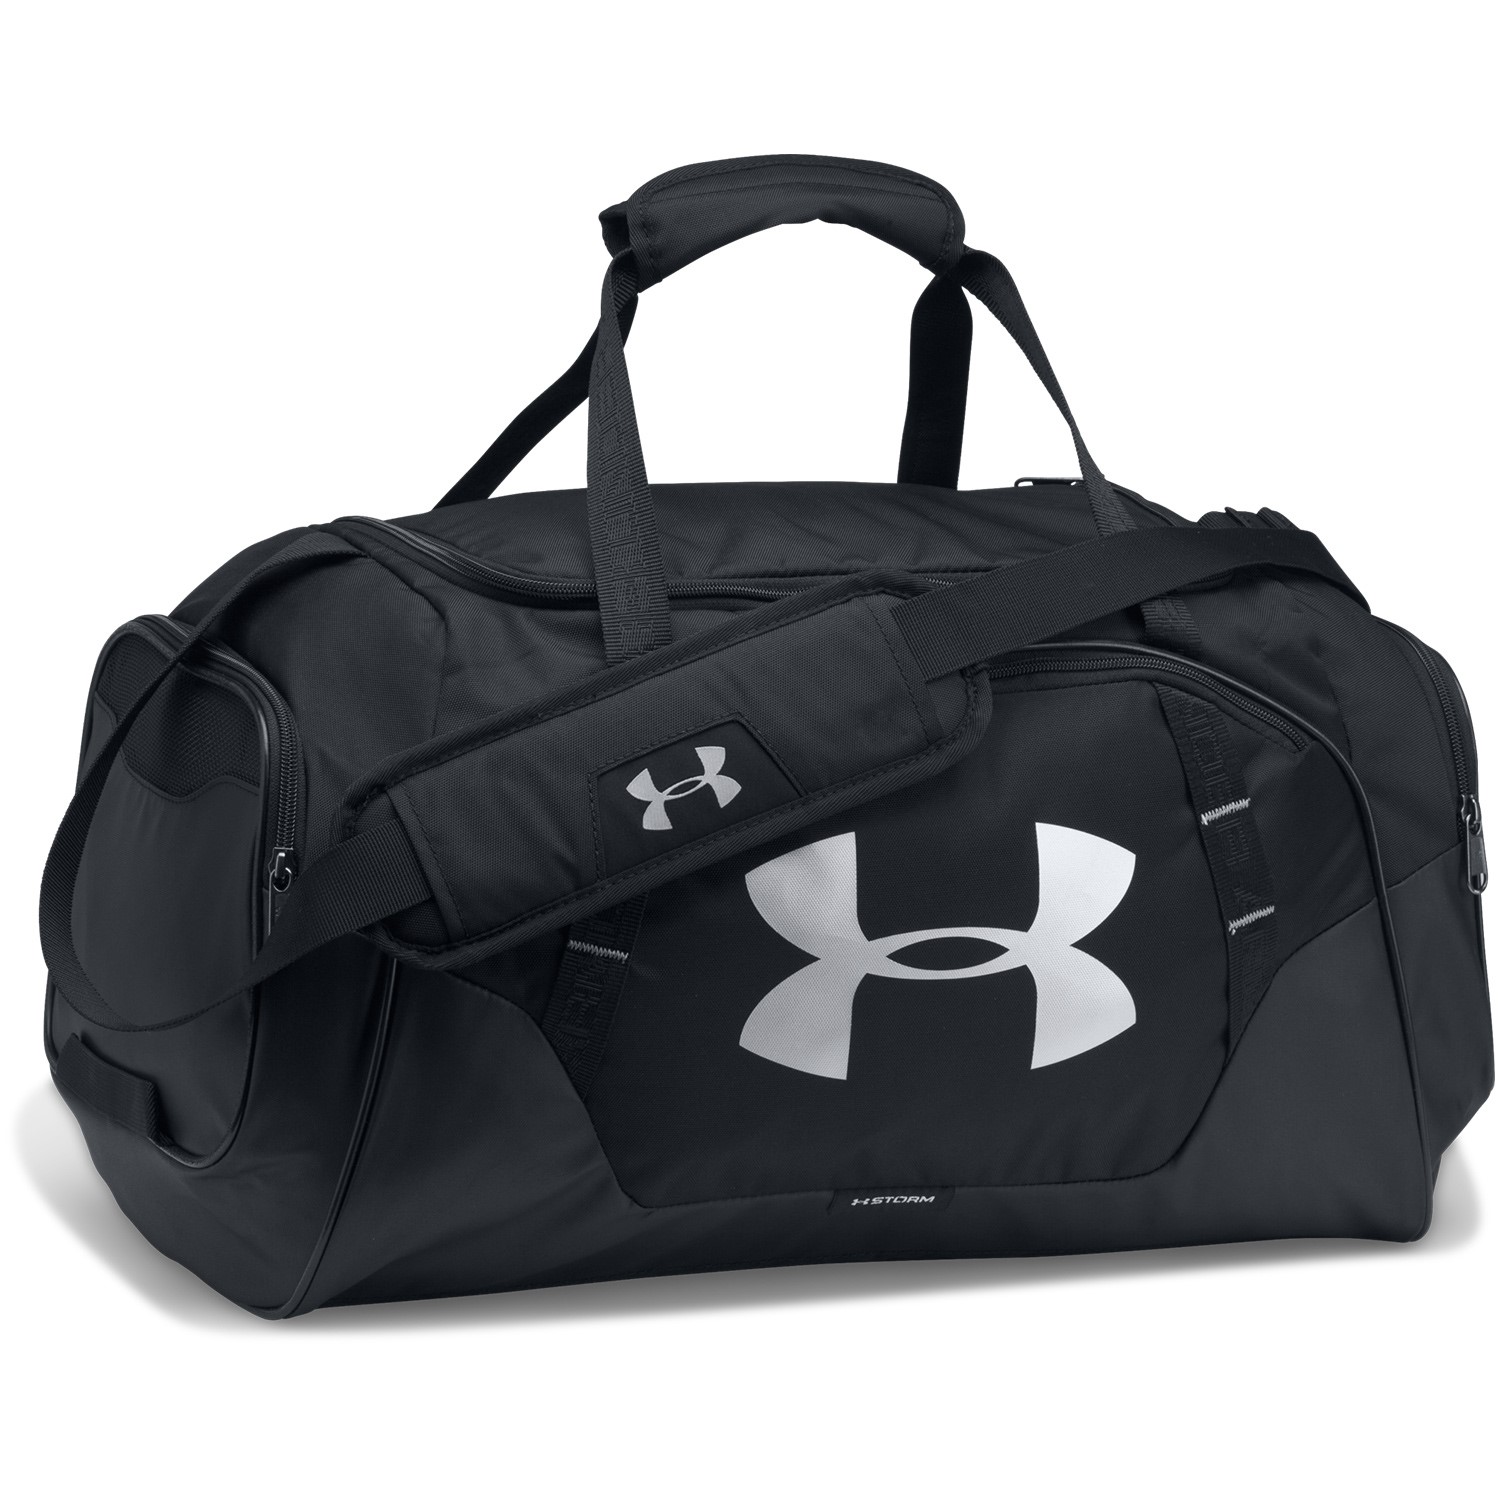 Under Armour Undeniable 3.0 Small Duffle Bag